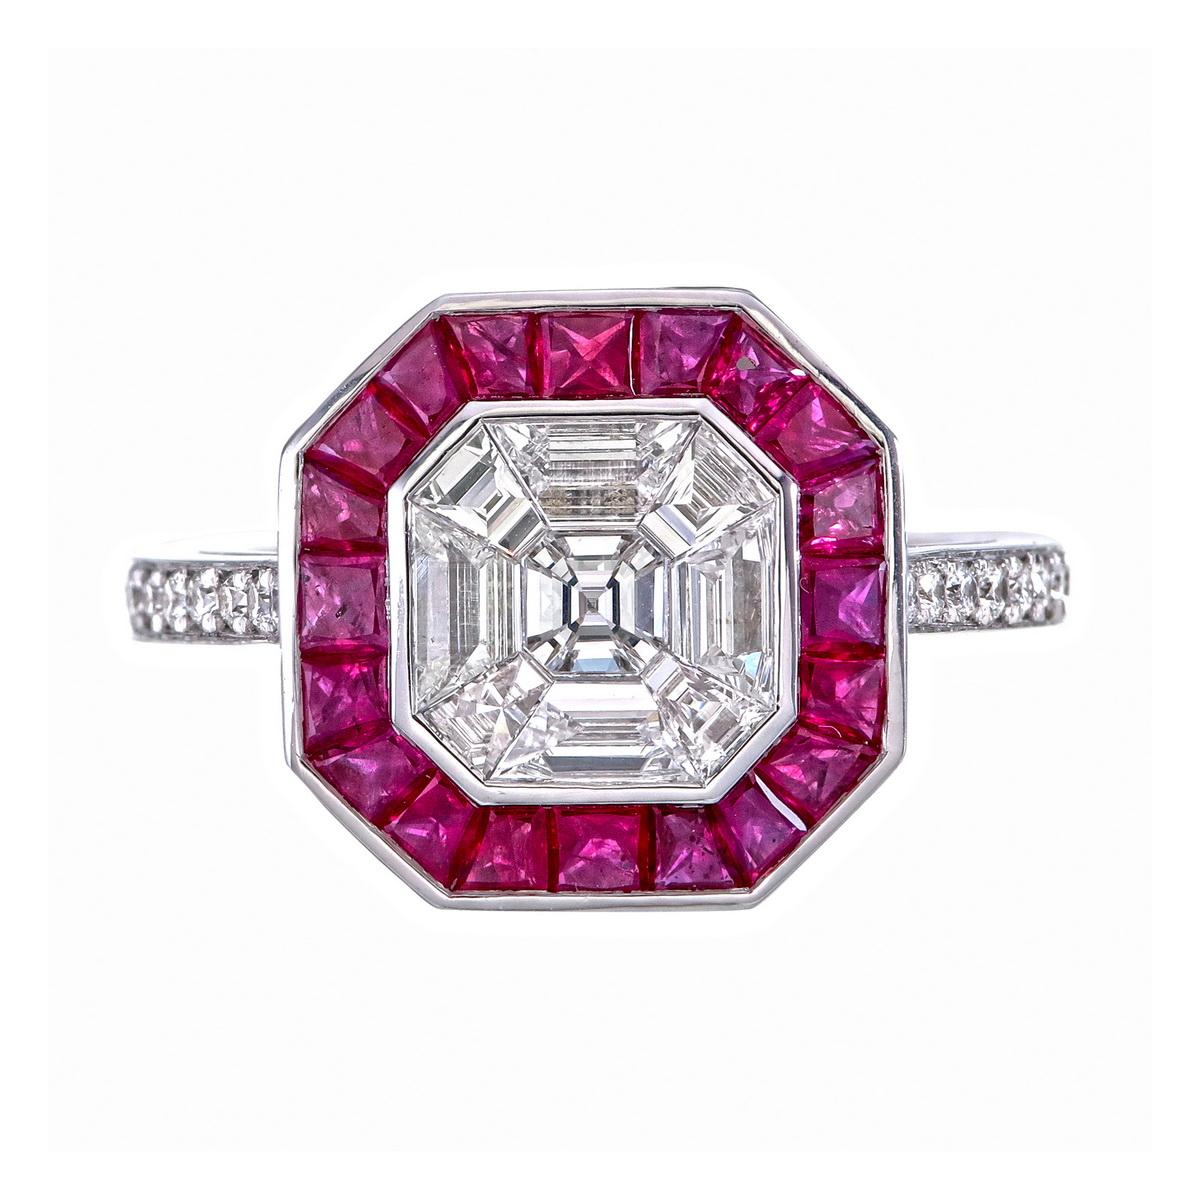 Piecut diamond invisible set diamond ring 
3 carat face up mix shape diamond placed side to side with no gaps in between.

Every Ruby is matched with perfection in color & cut, polished & set to perfection.

VVS claarity diamonds & natural ruby 